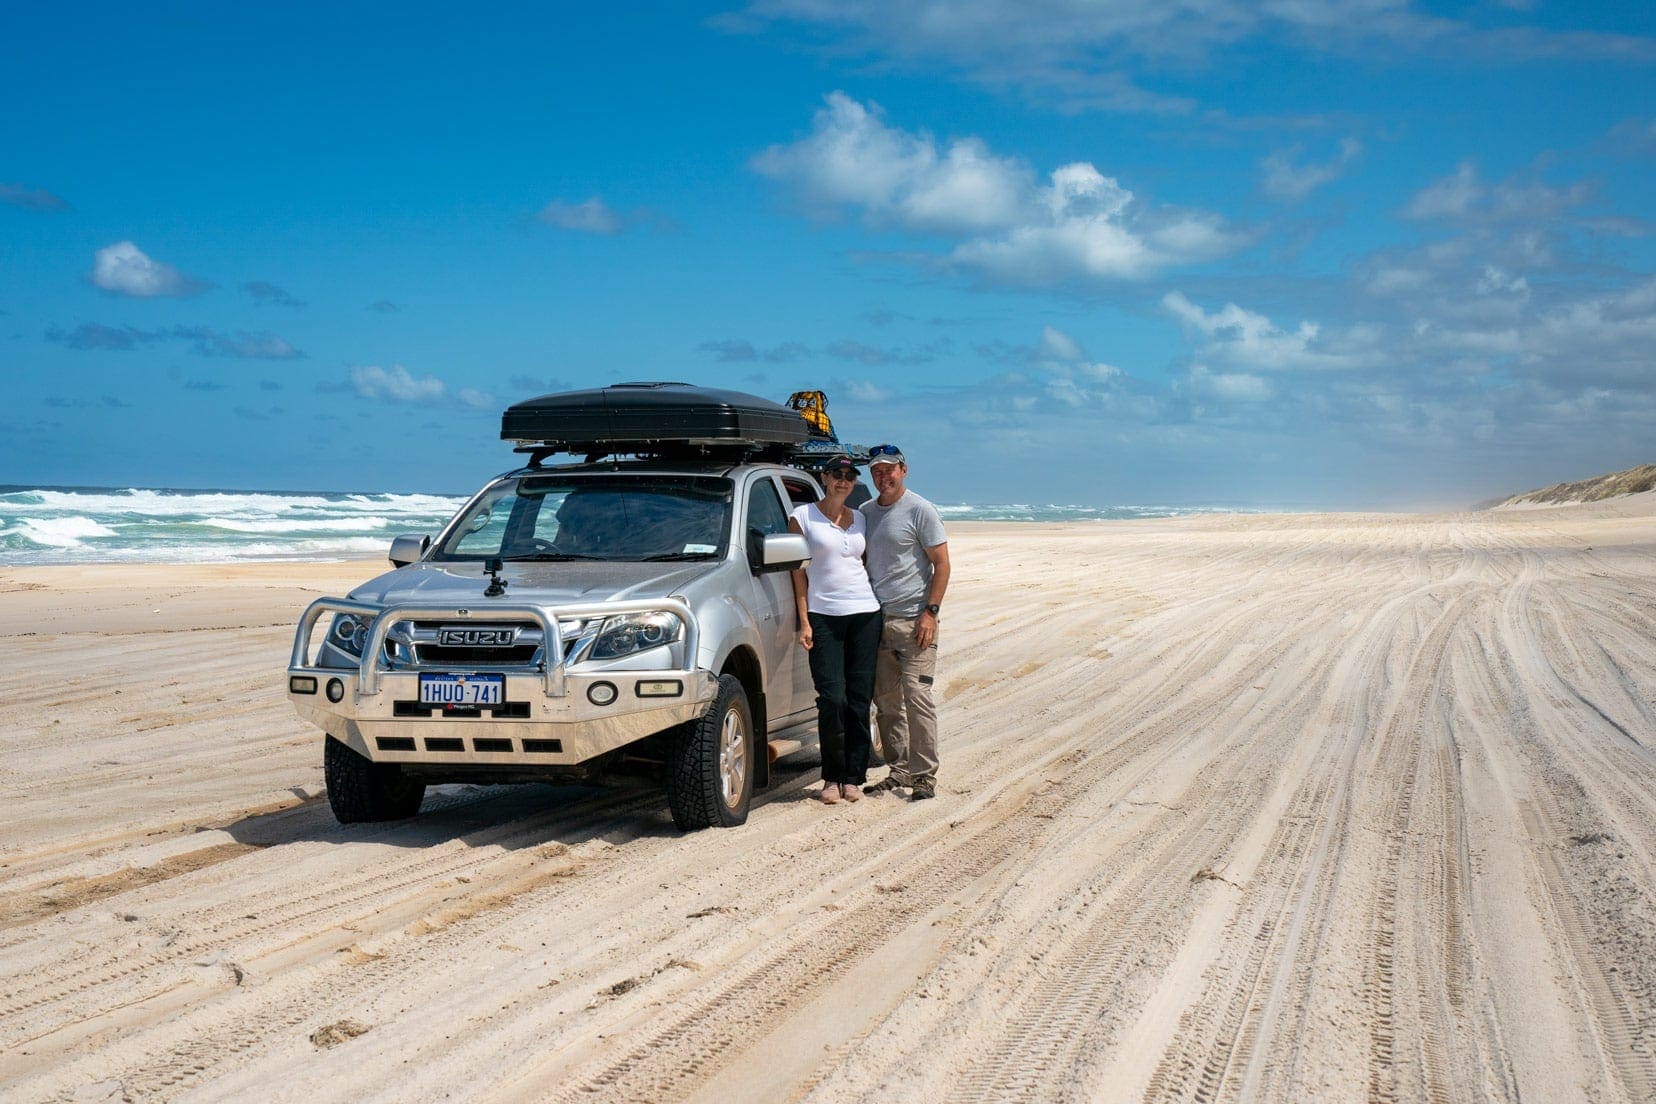 Road Trip Tips for Couples header image of Shelley ad Lars of Lifejourney4two stood by their 4x4 on a beach